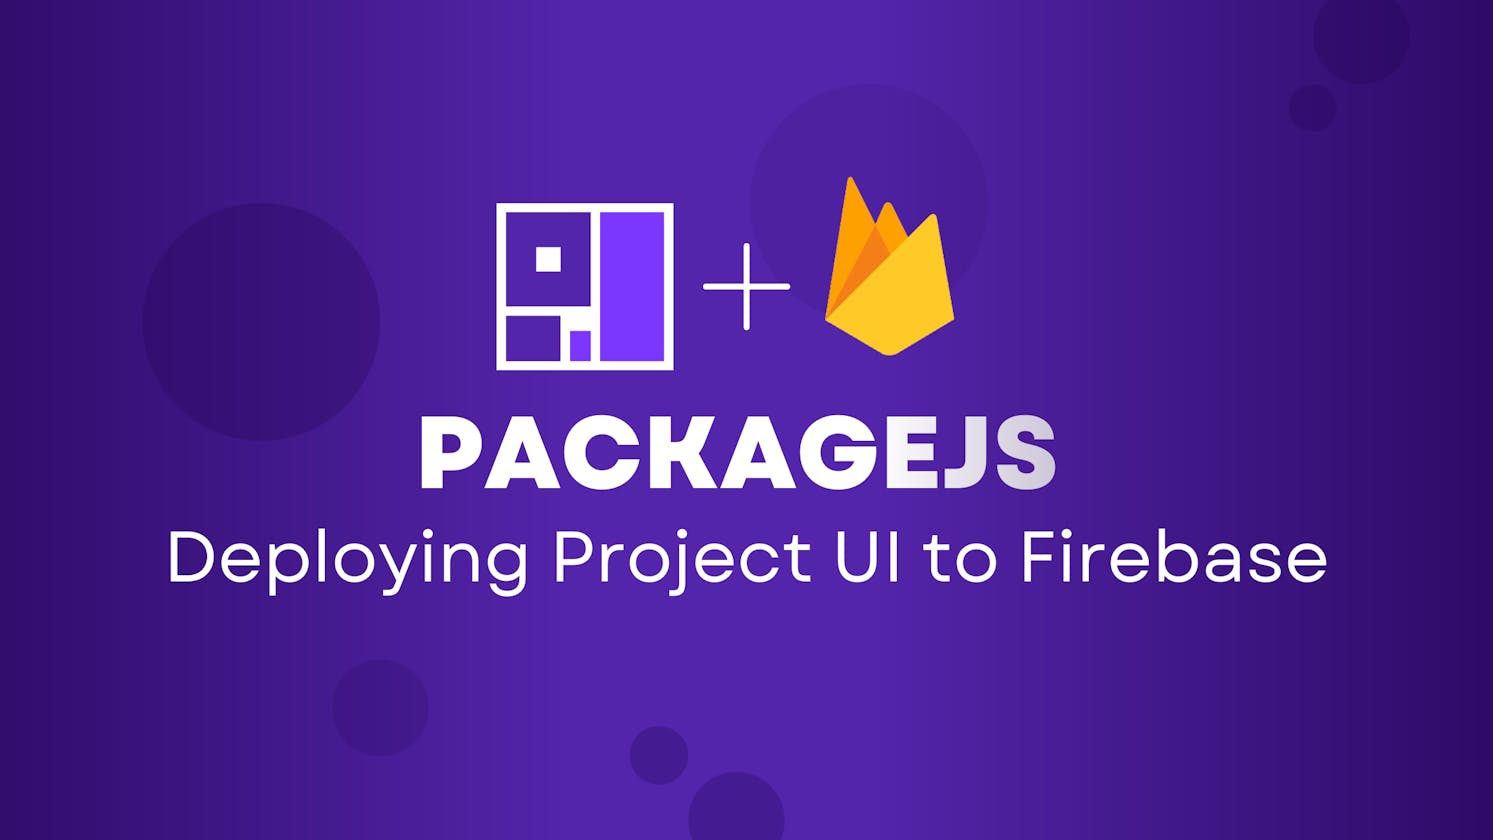 Deploying a PackageJS Project to UI Firebase (PRO TIP)